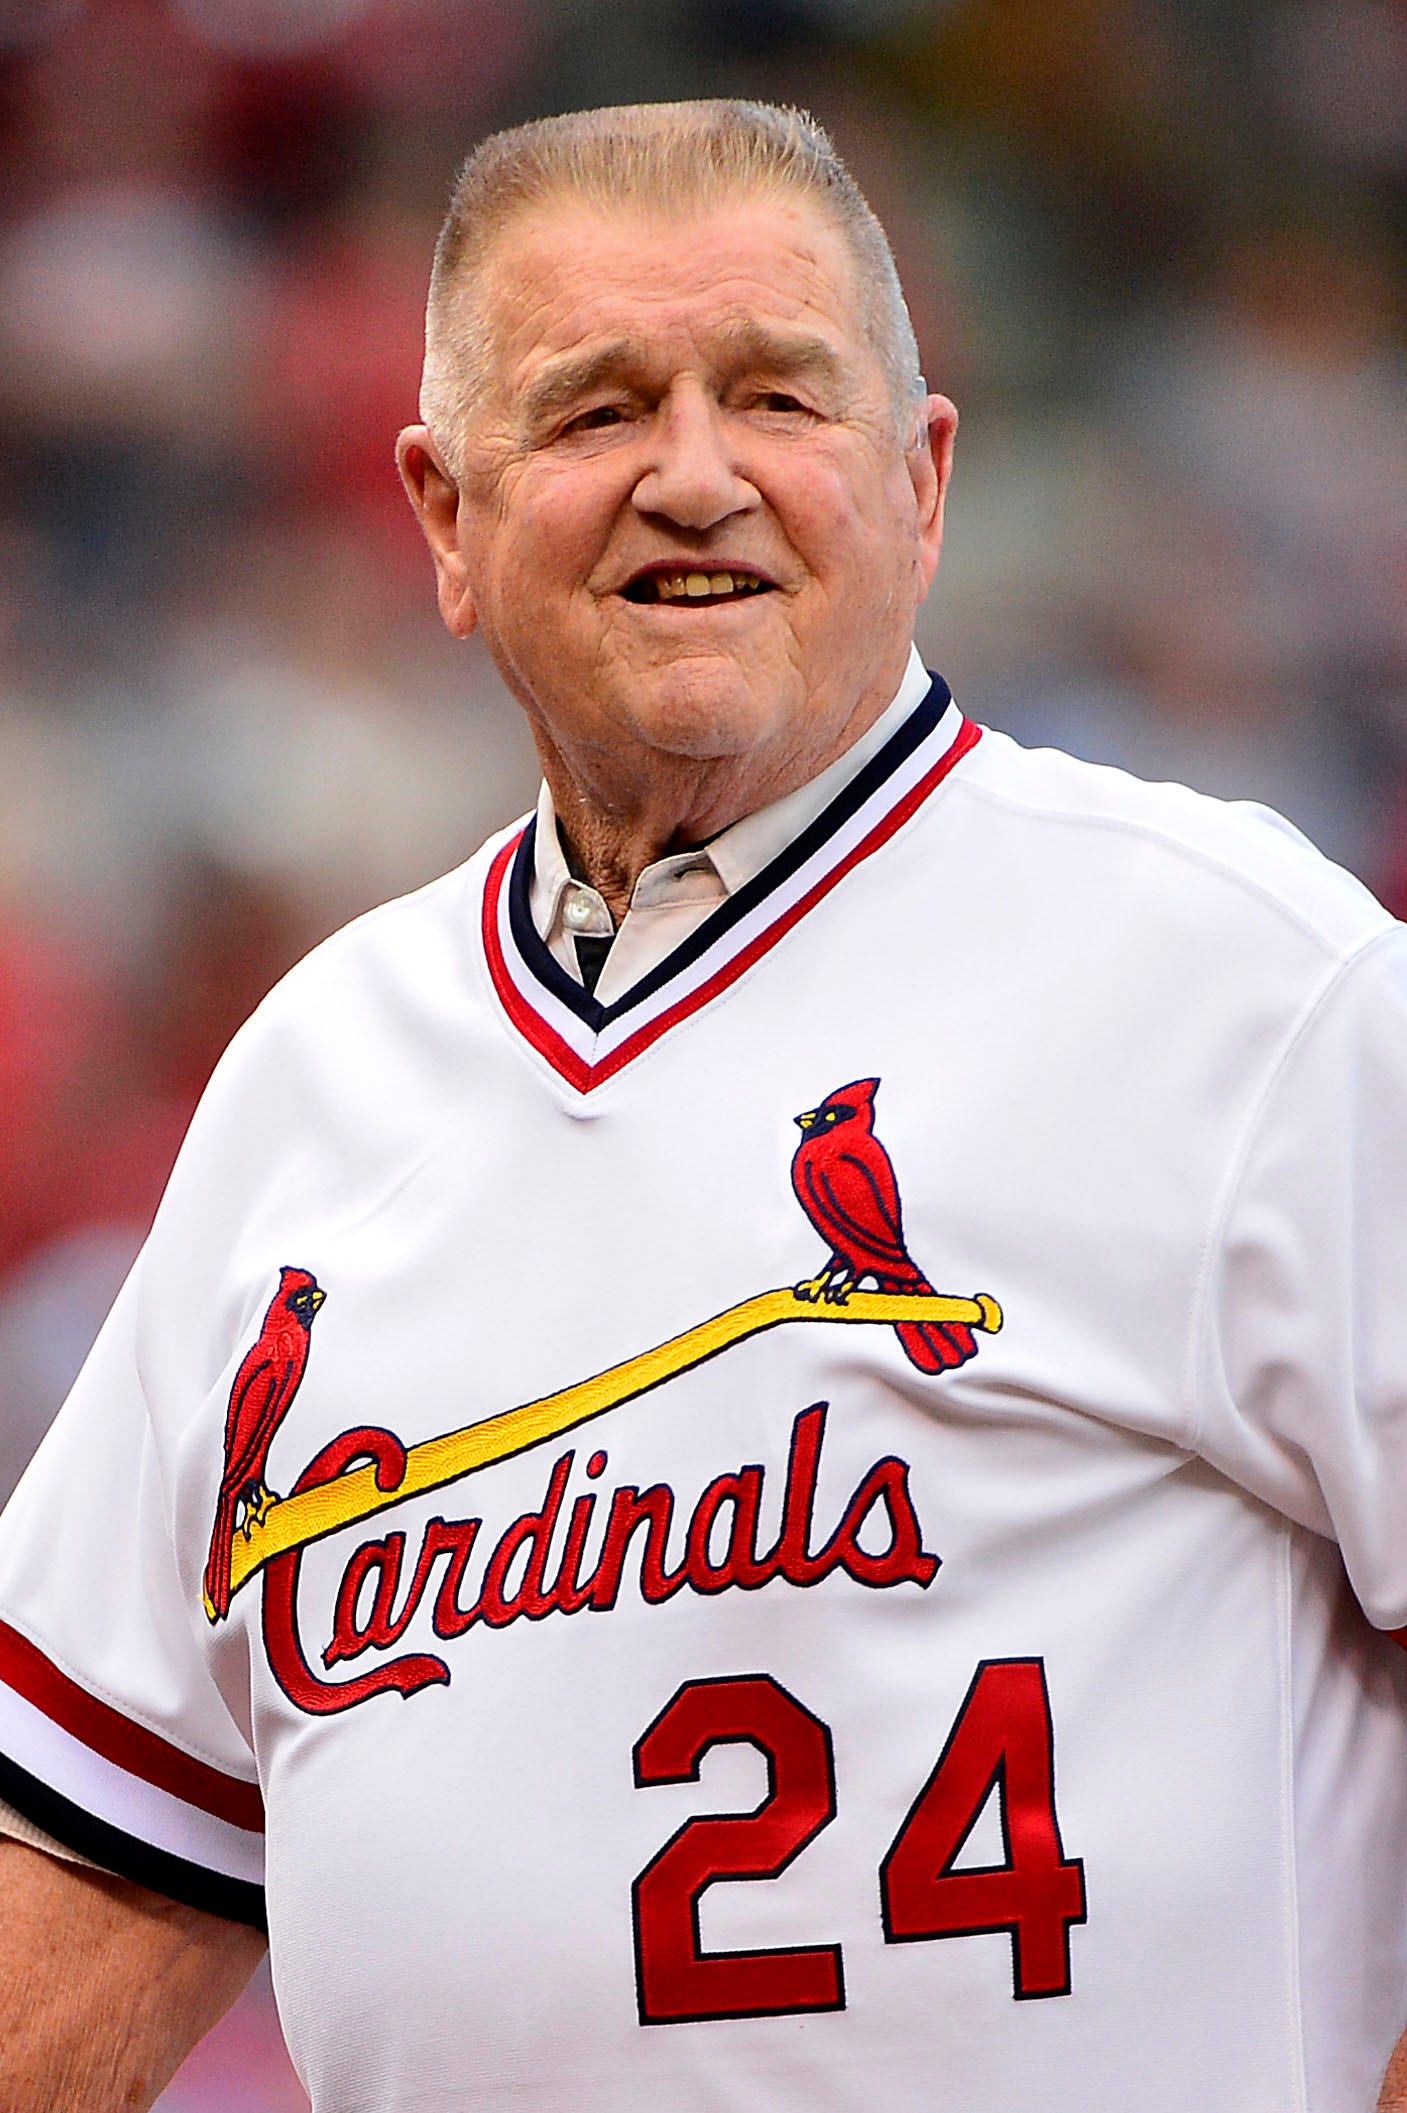 whitey herzog, hall of fame manager who led cardinals to 3 pennants, dies at 92